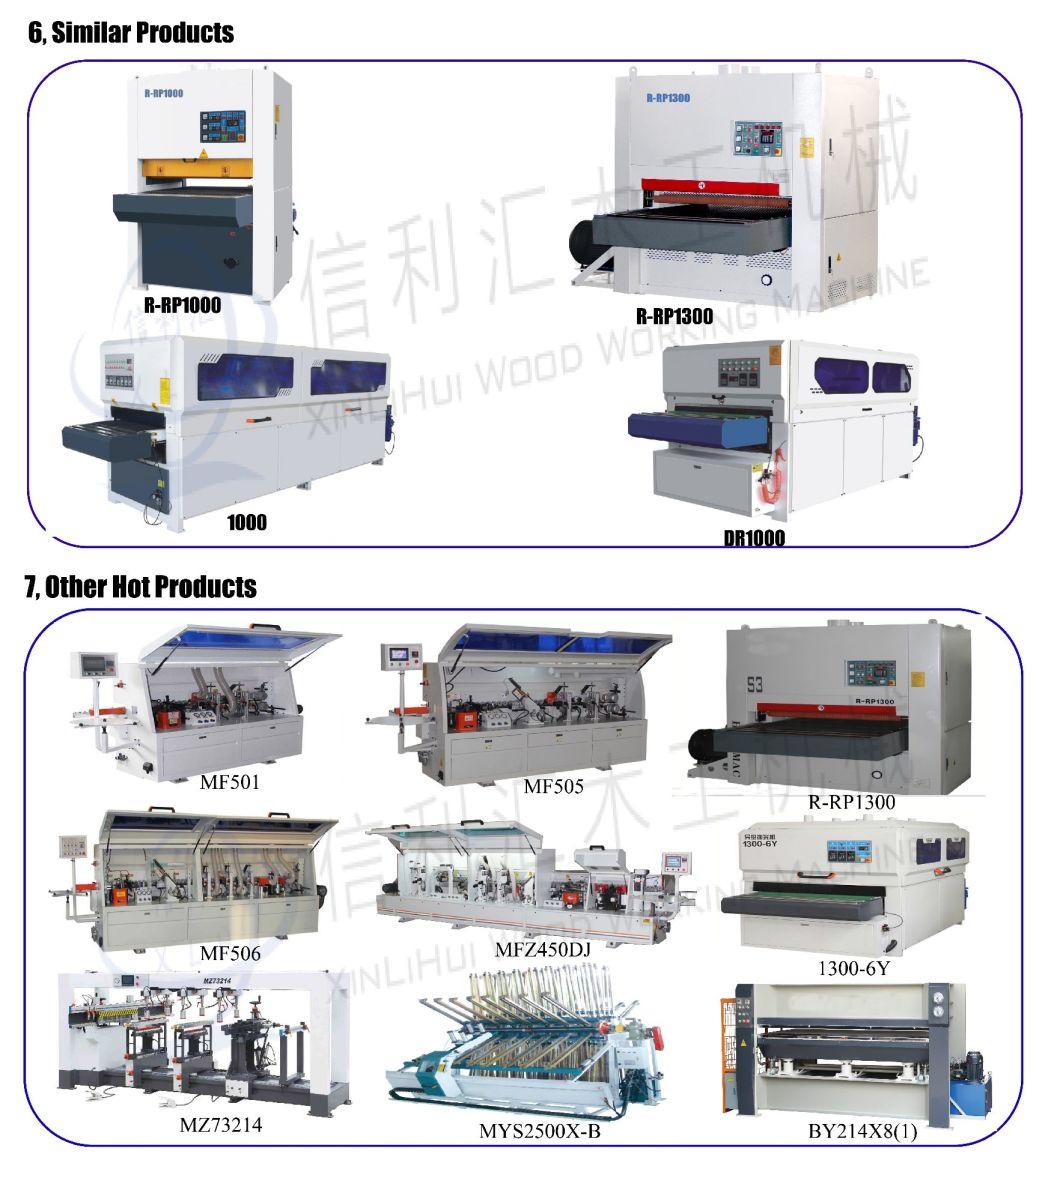 1000 R-RP First Unit Contat Drum or Roller Sanding Machine and Second Unit Roller and Finishing Sander Platen 220V 3 pH 60 Hz Controls for Resale